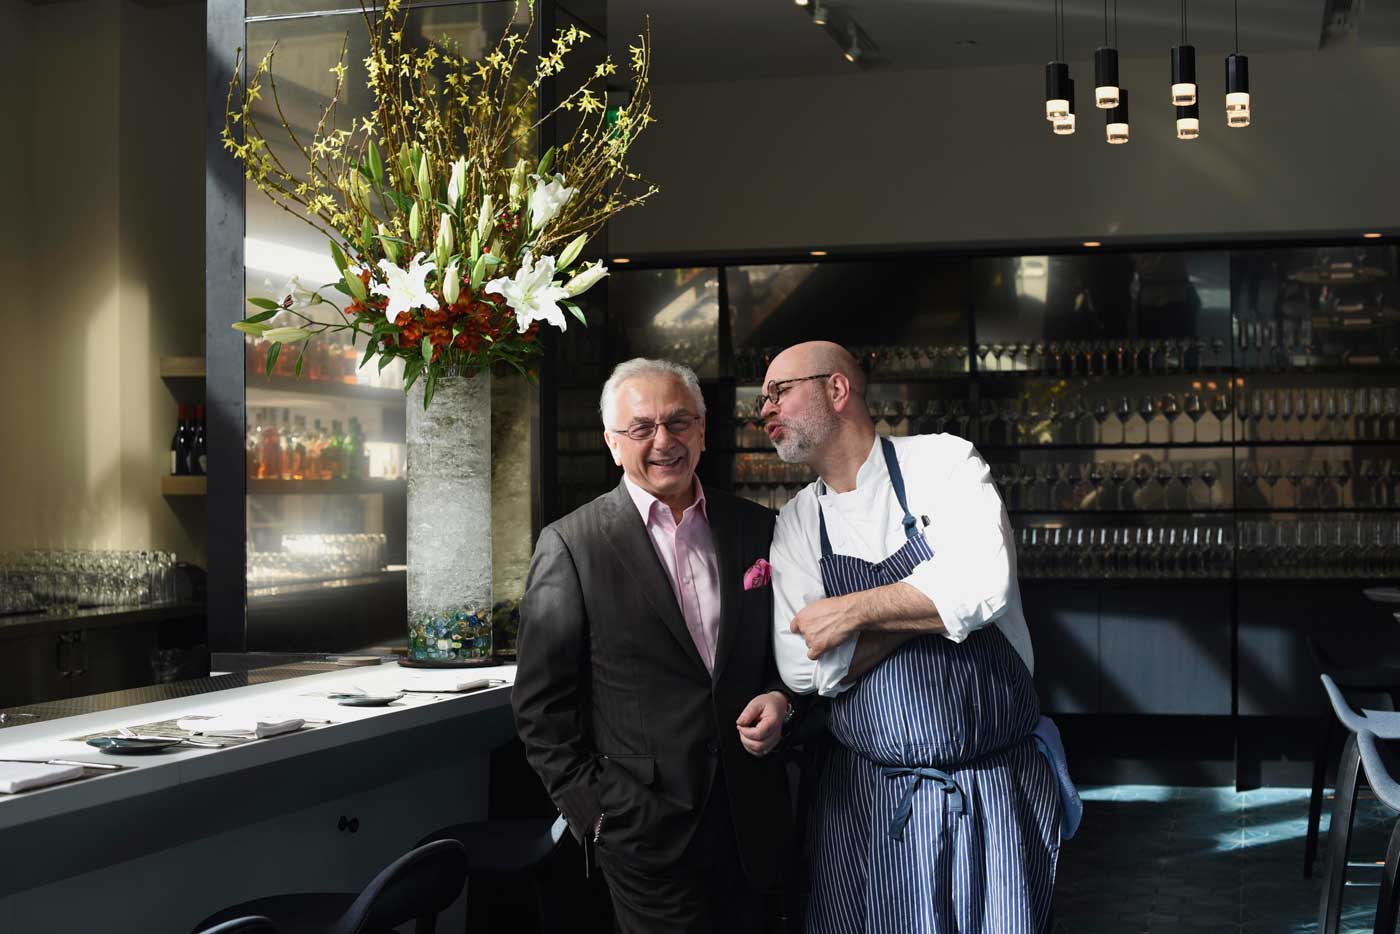 Chef Staffan Terje and Umberto Gibin have worked together for over a decade and have developed a rich partnership. Kisses all around!